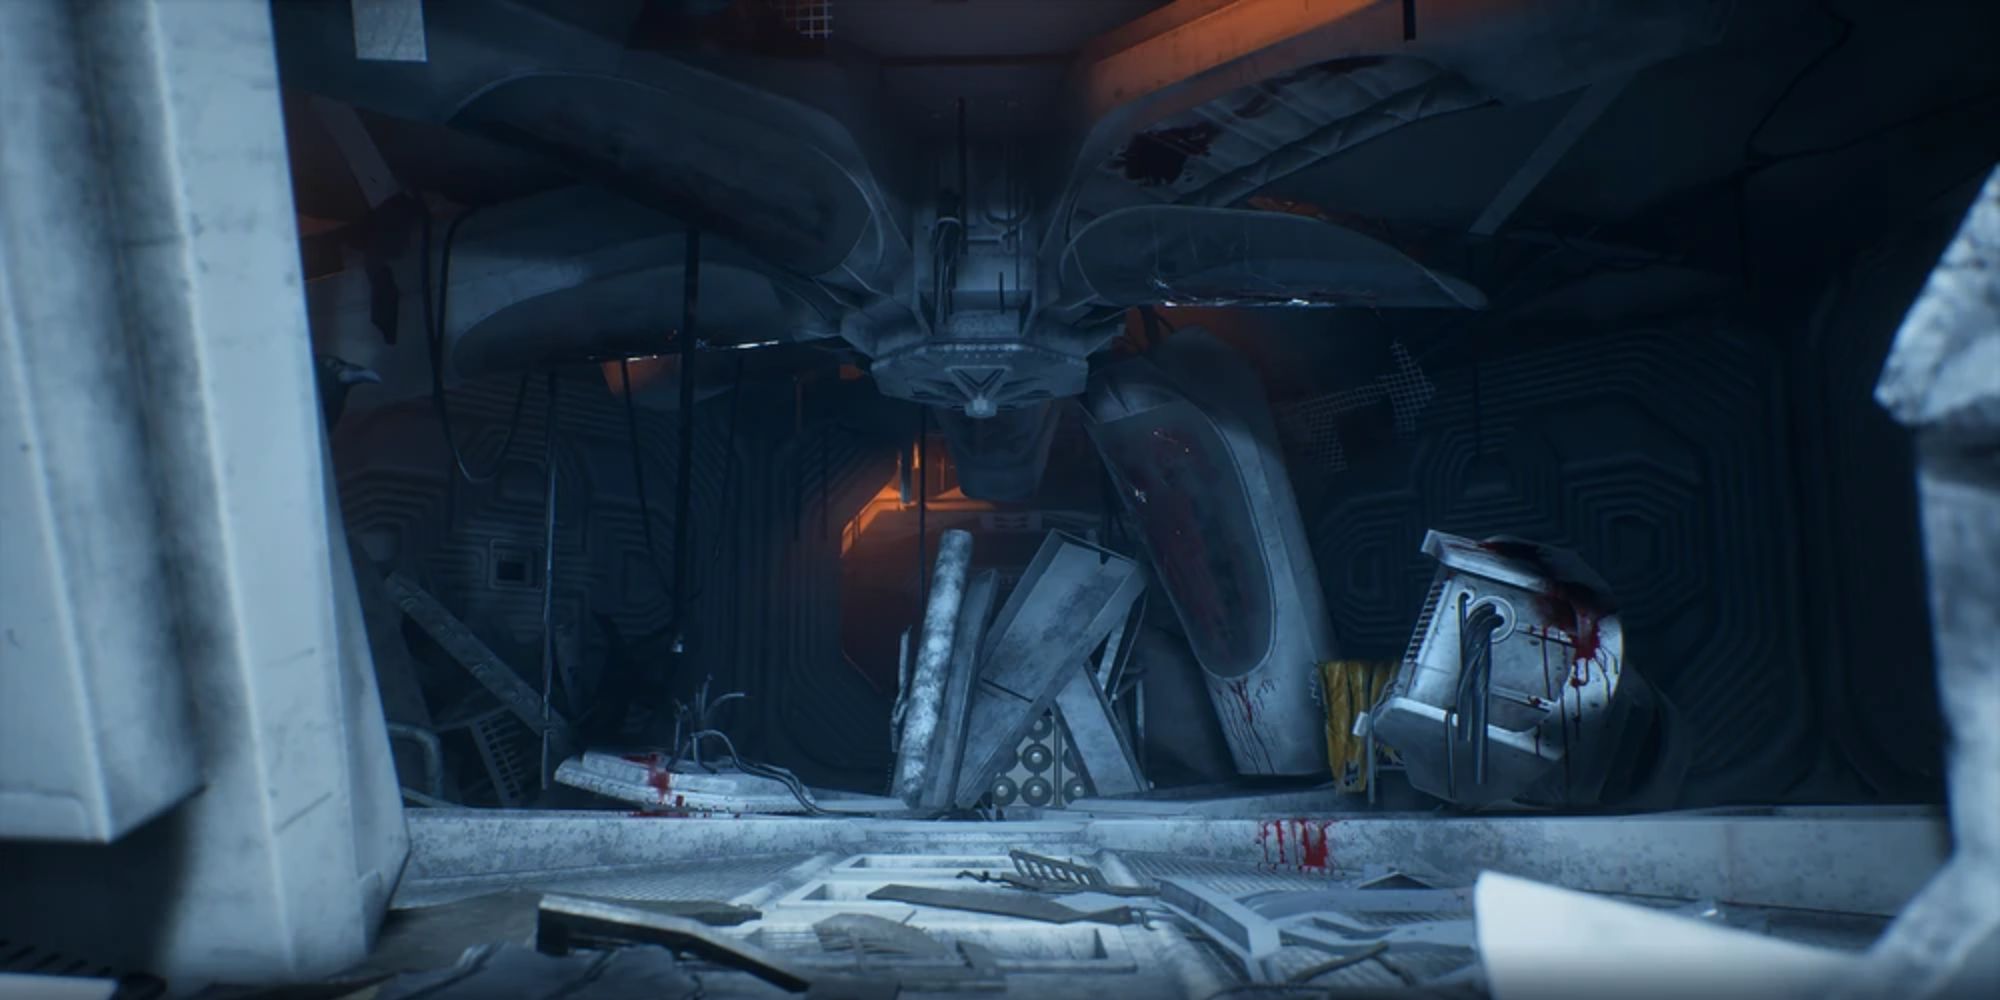 Nostromo Wreckage Dead By Daylight Cryo Room in the ship wreckage of the nostromo Alien Dead By Daylight Chapter 29 DLC